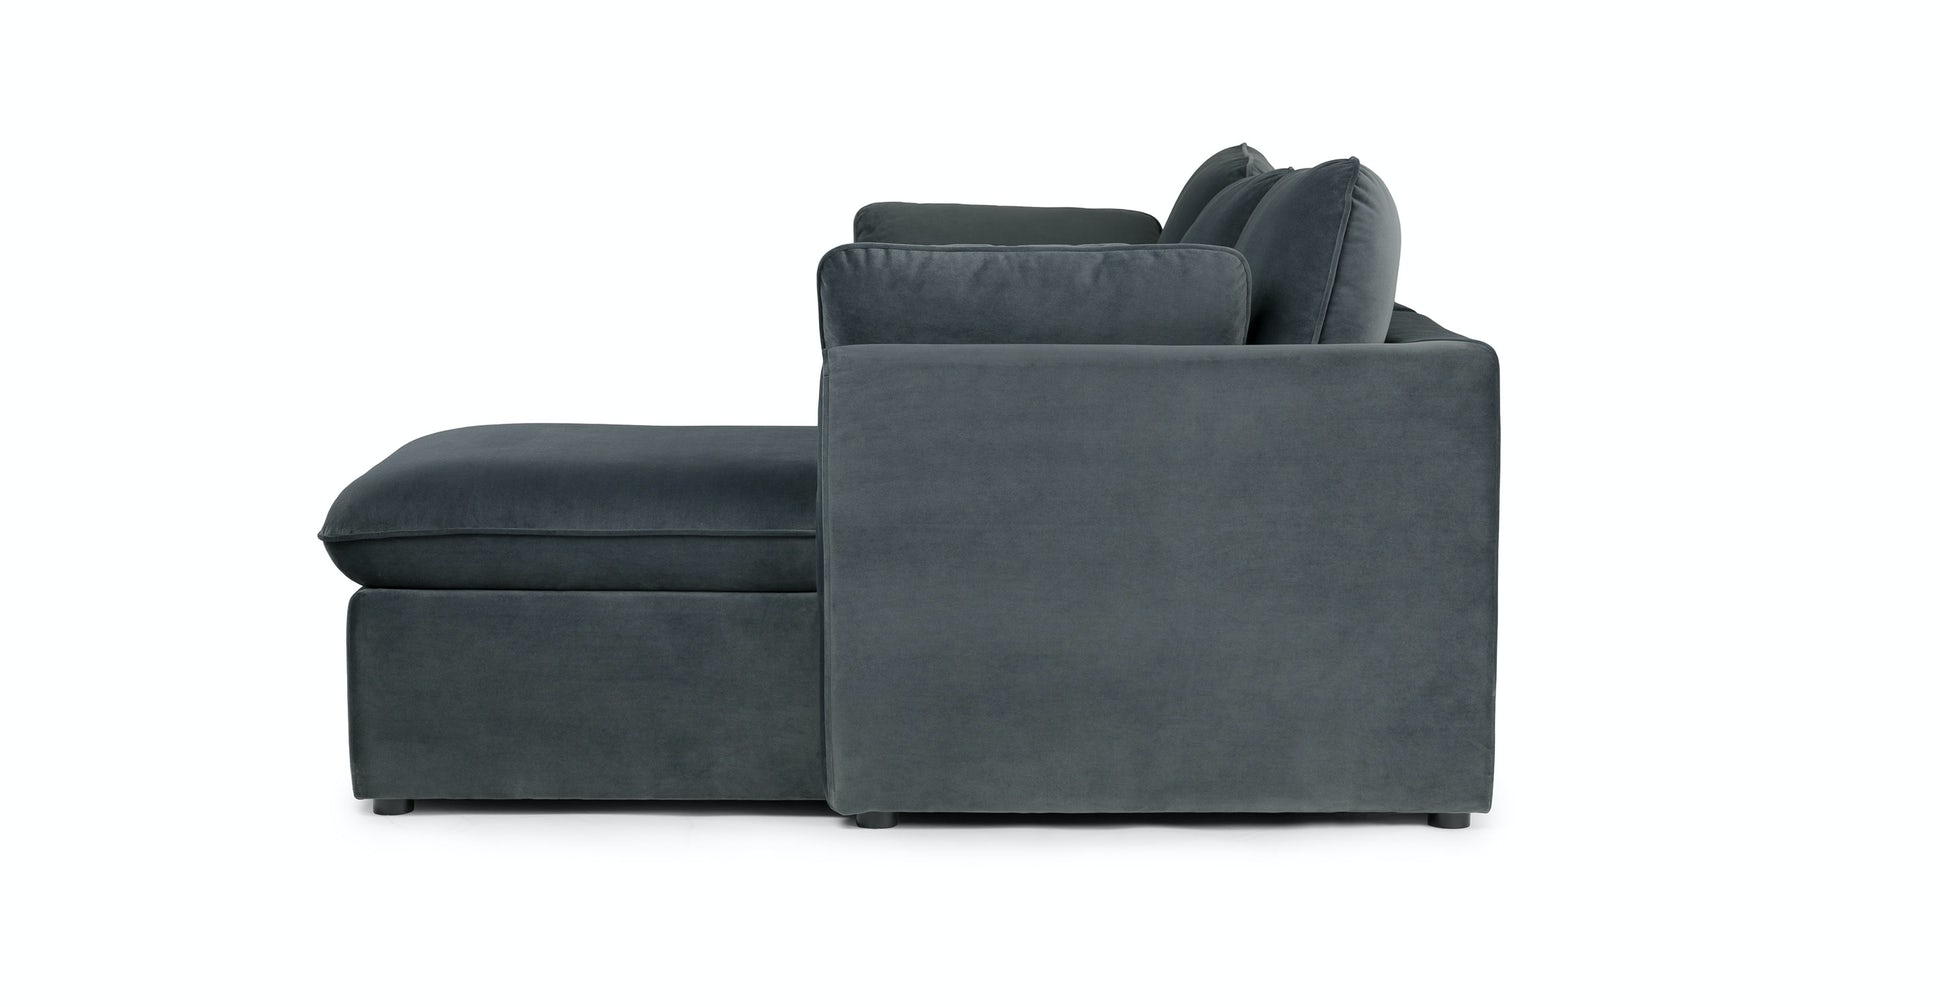 Oneira Deep Sea Blue Right Sofa Bed - Image 2